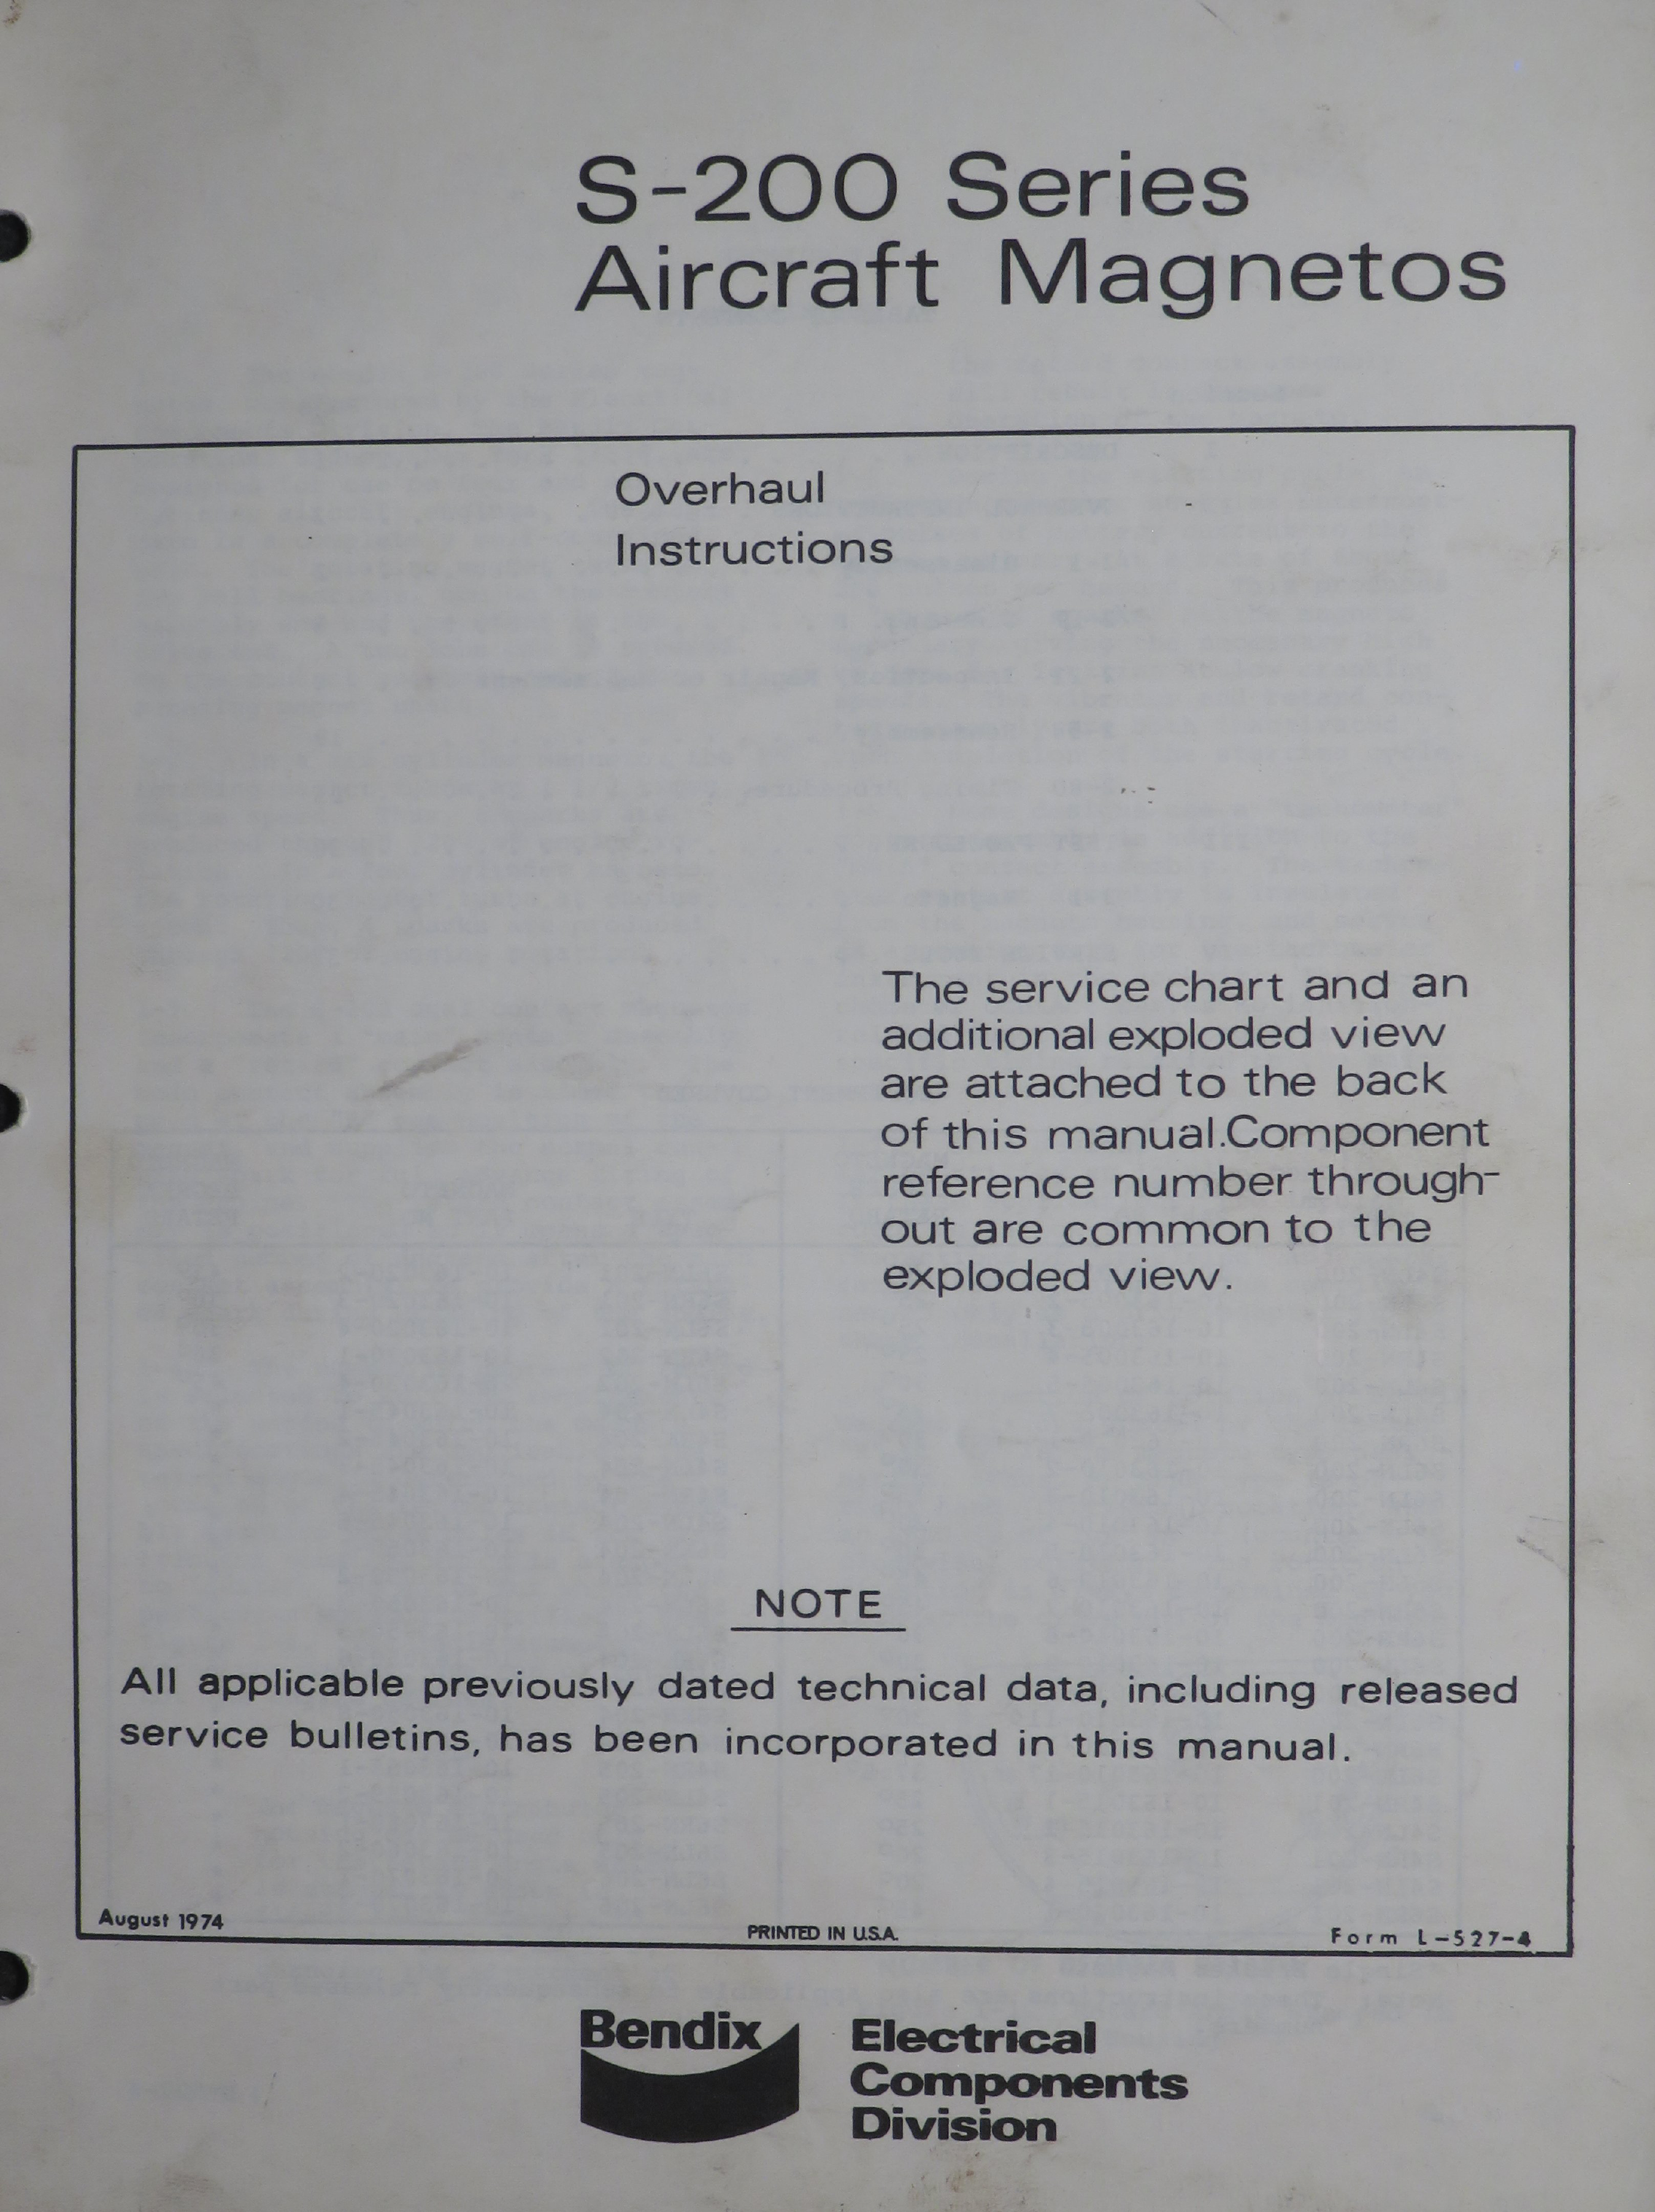 Sample page 1 from AirCorps Library document: Overhaul Instructions for Bendix S-200 Series Magnetos